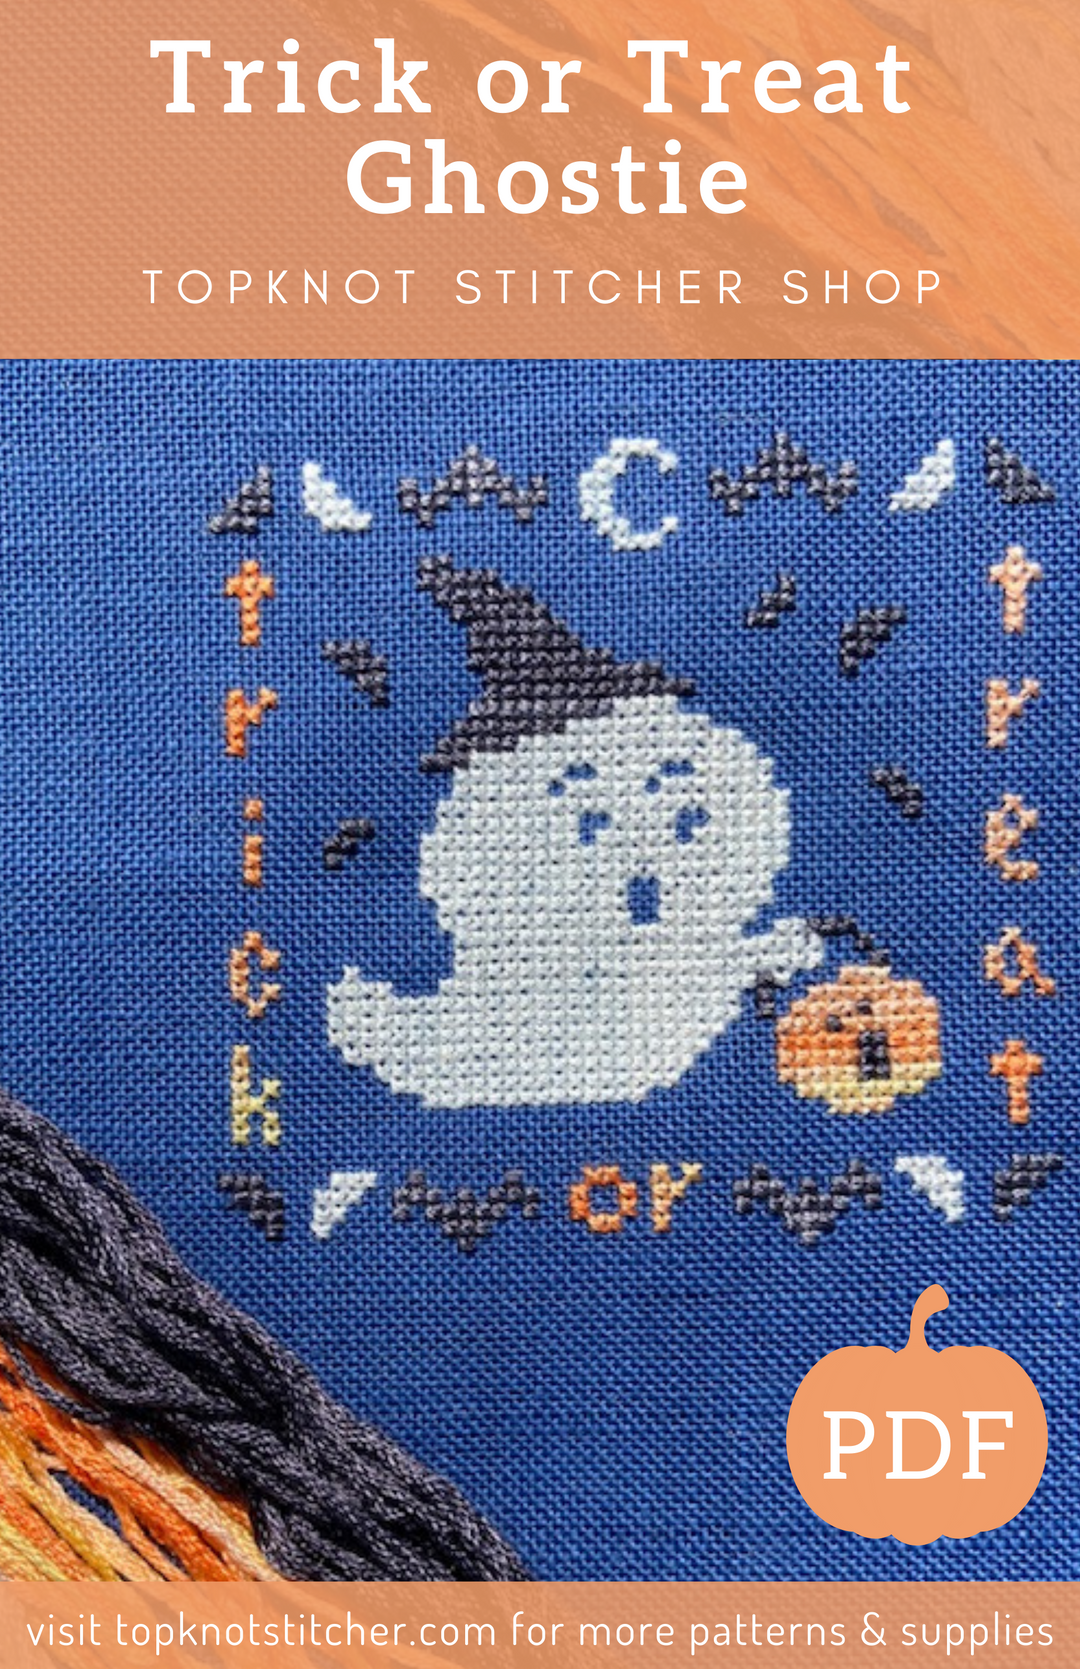 Trick or Treat Ghostie - Be My Boo Part 2! (PDF) | TopKnot Stitcher Shop - PDF Download